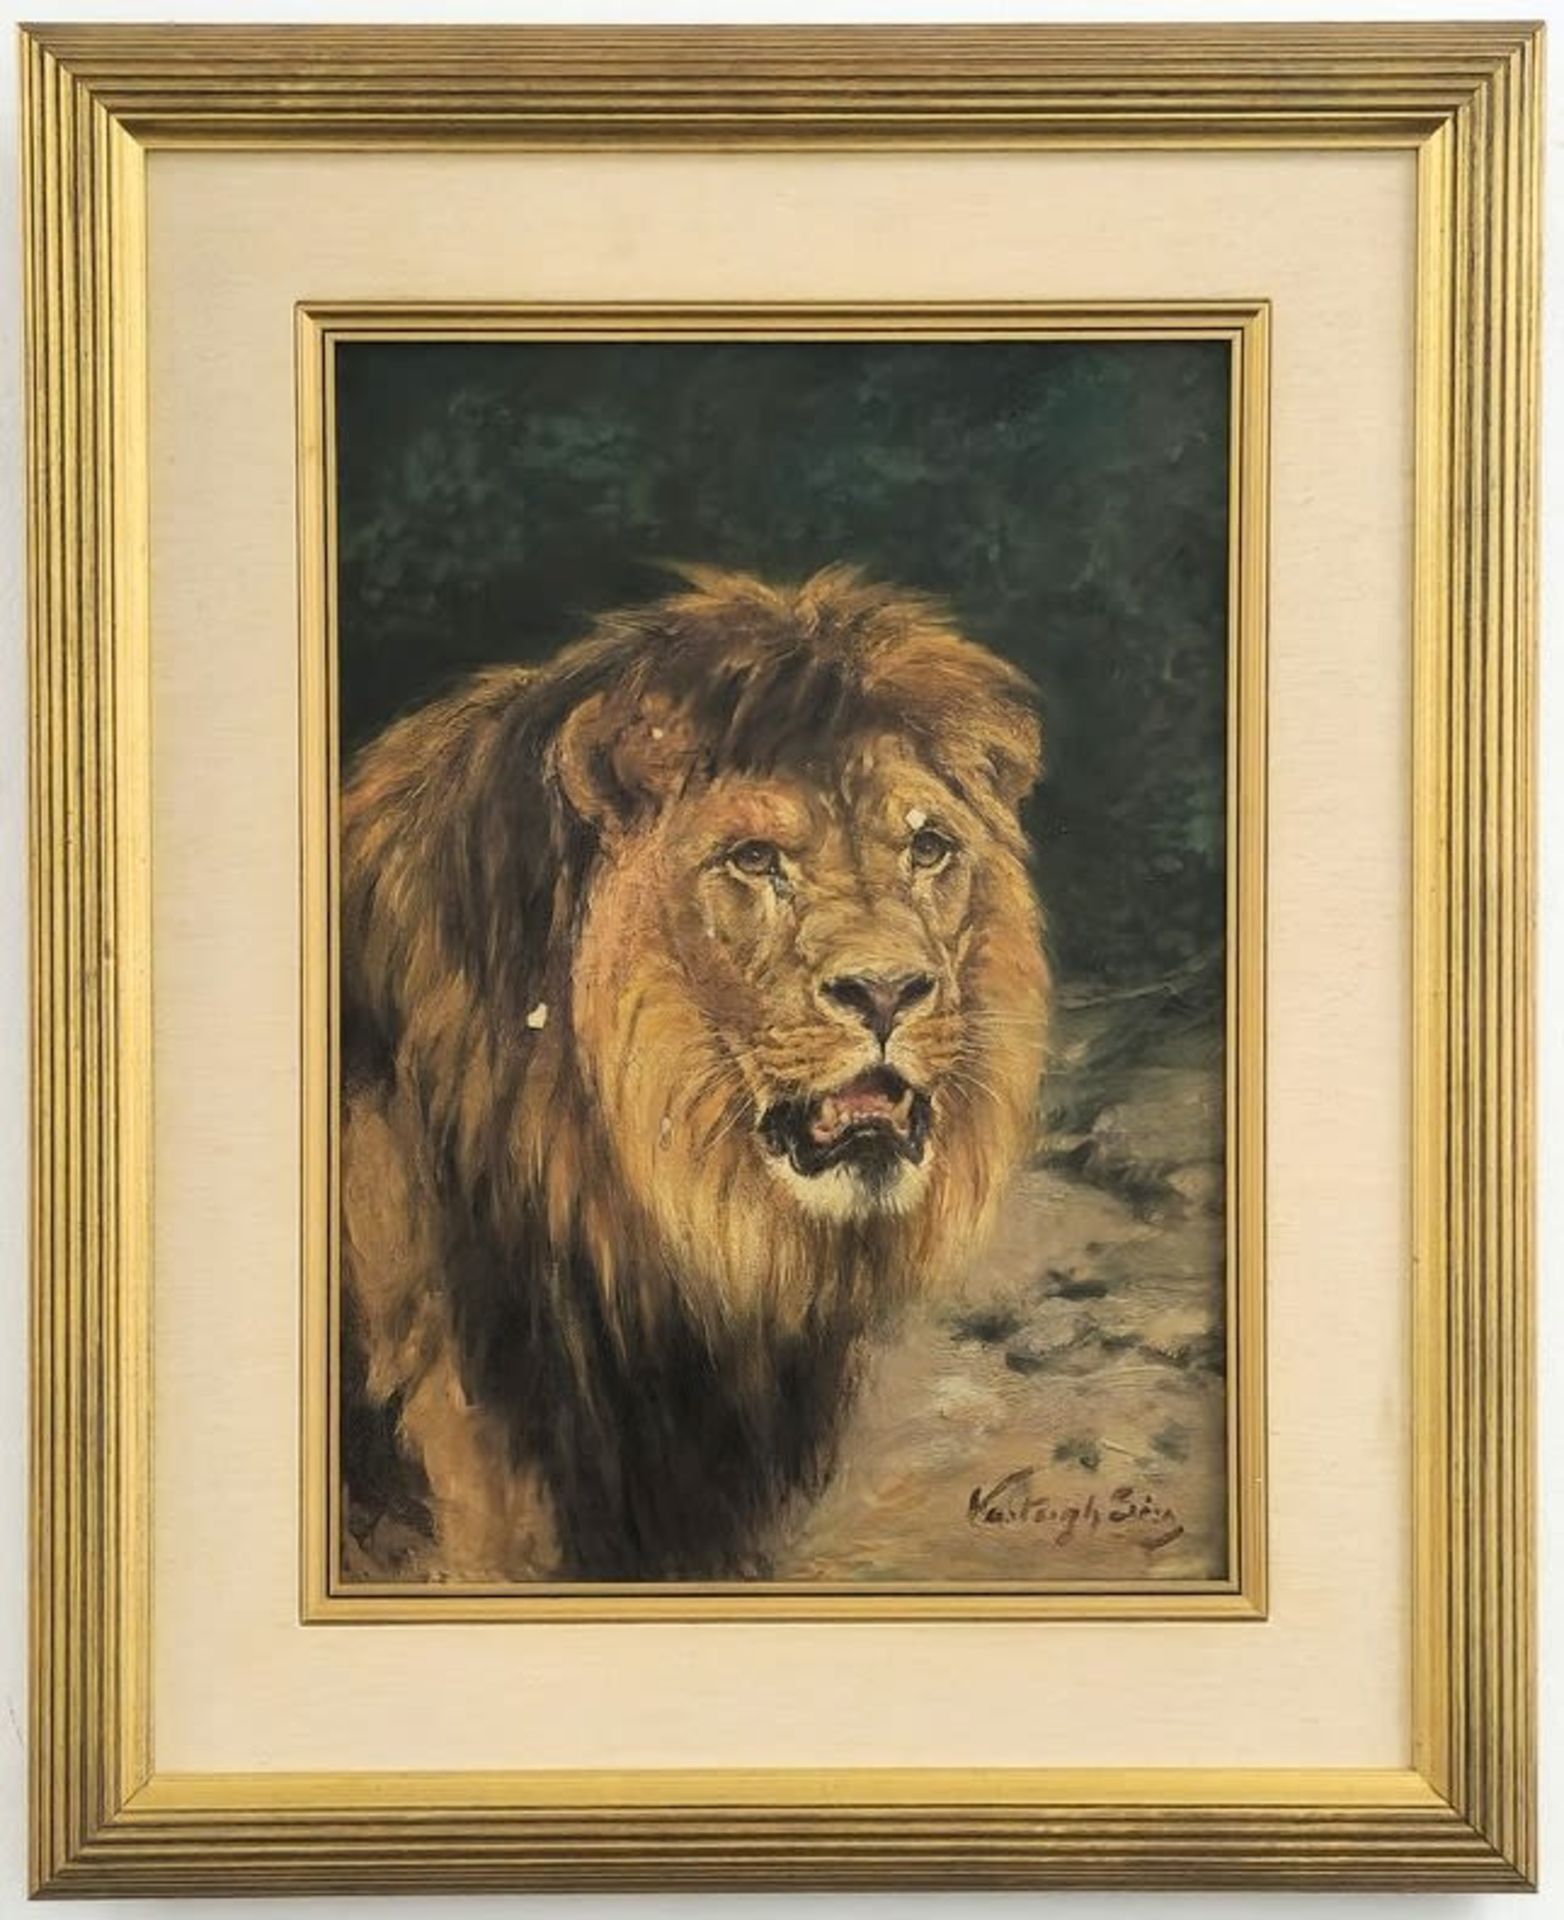 'Lion' - Géza Vastagh, oil painting on canvas, (Hungarian painter, Géza Vastagh, lived between the